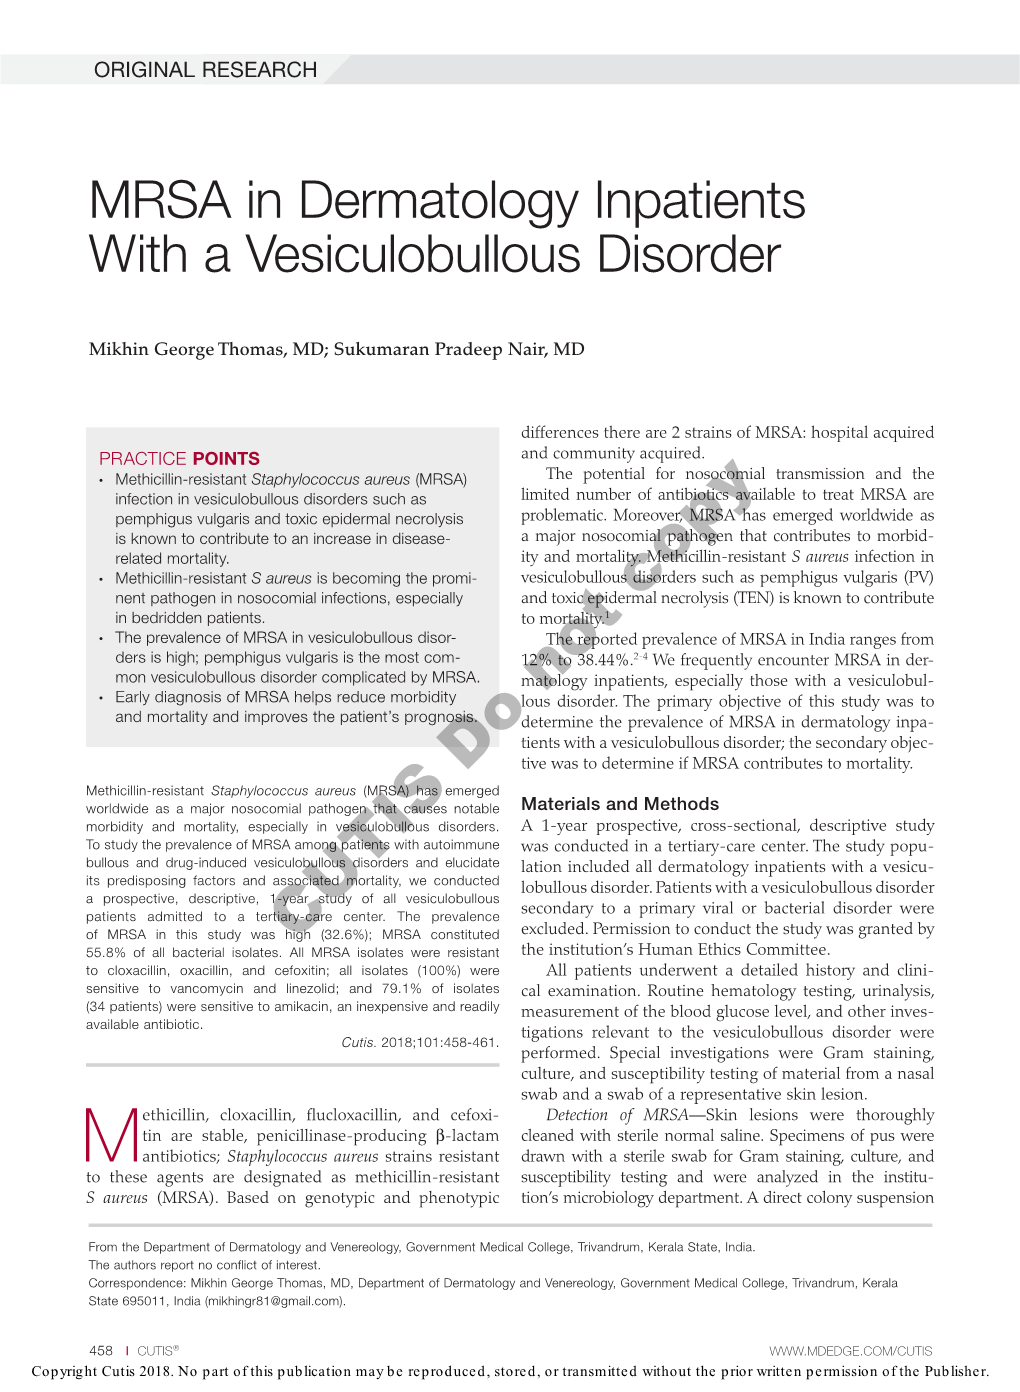 MRSA in Dermatology Inpatients with a Vesiculobullous Disorder